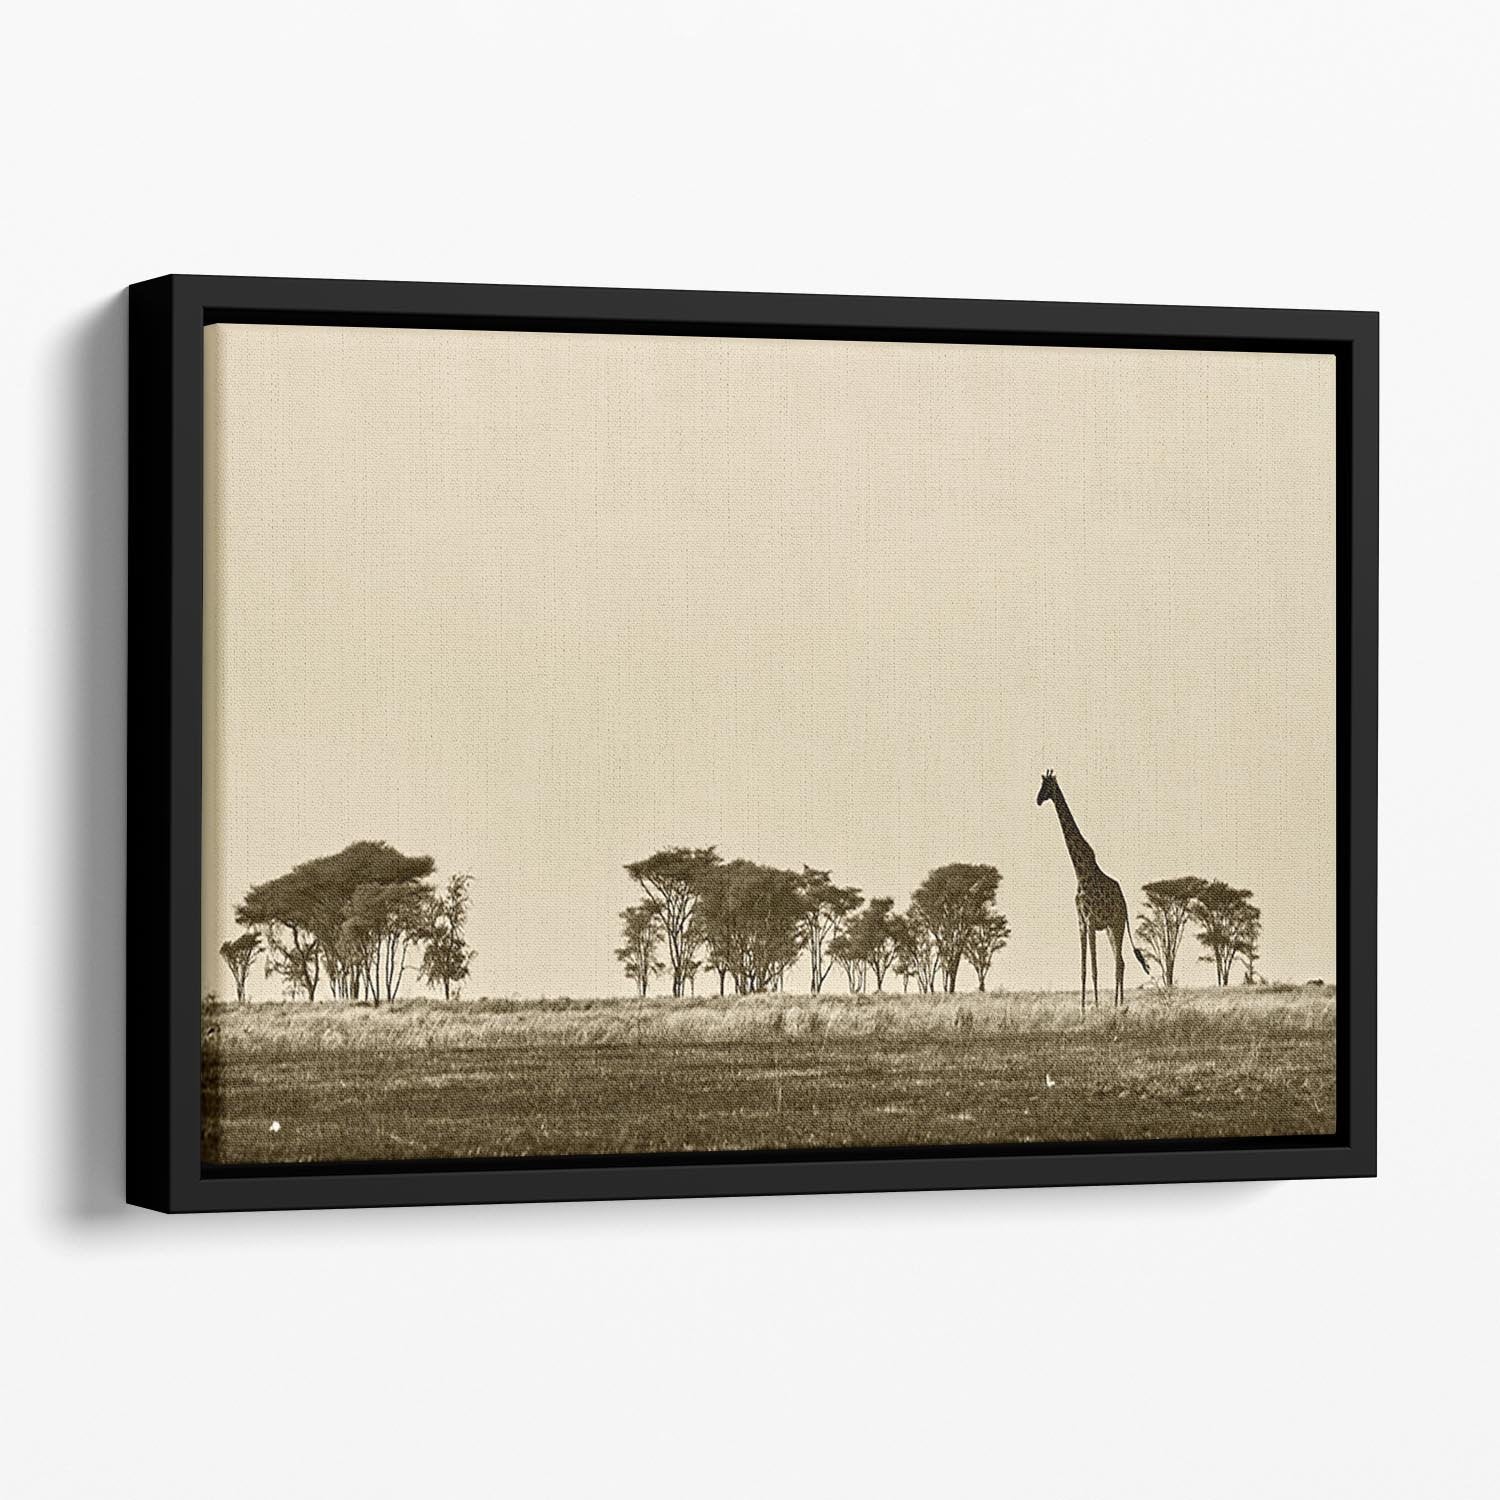 African landscape with giraffe in black and white Floating Framed Canvas - Canvas Art Rocks - 1